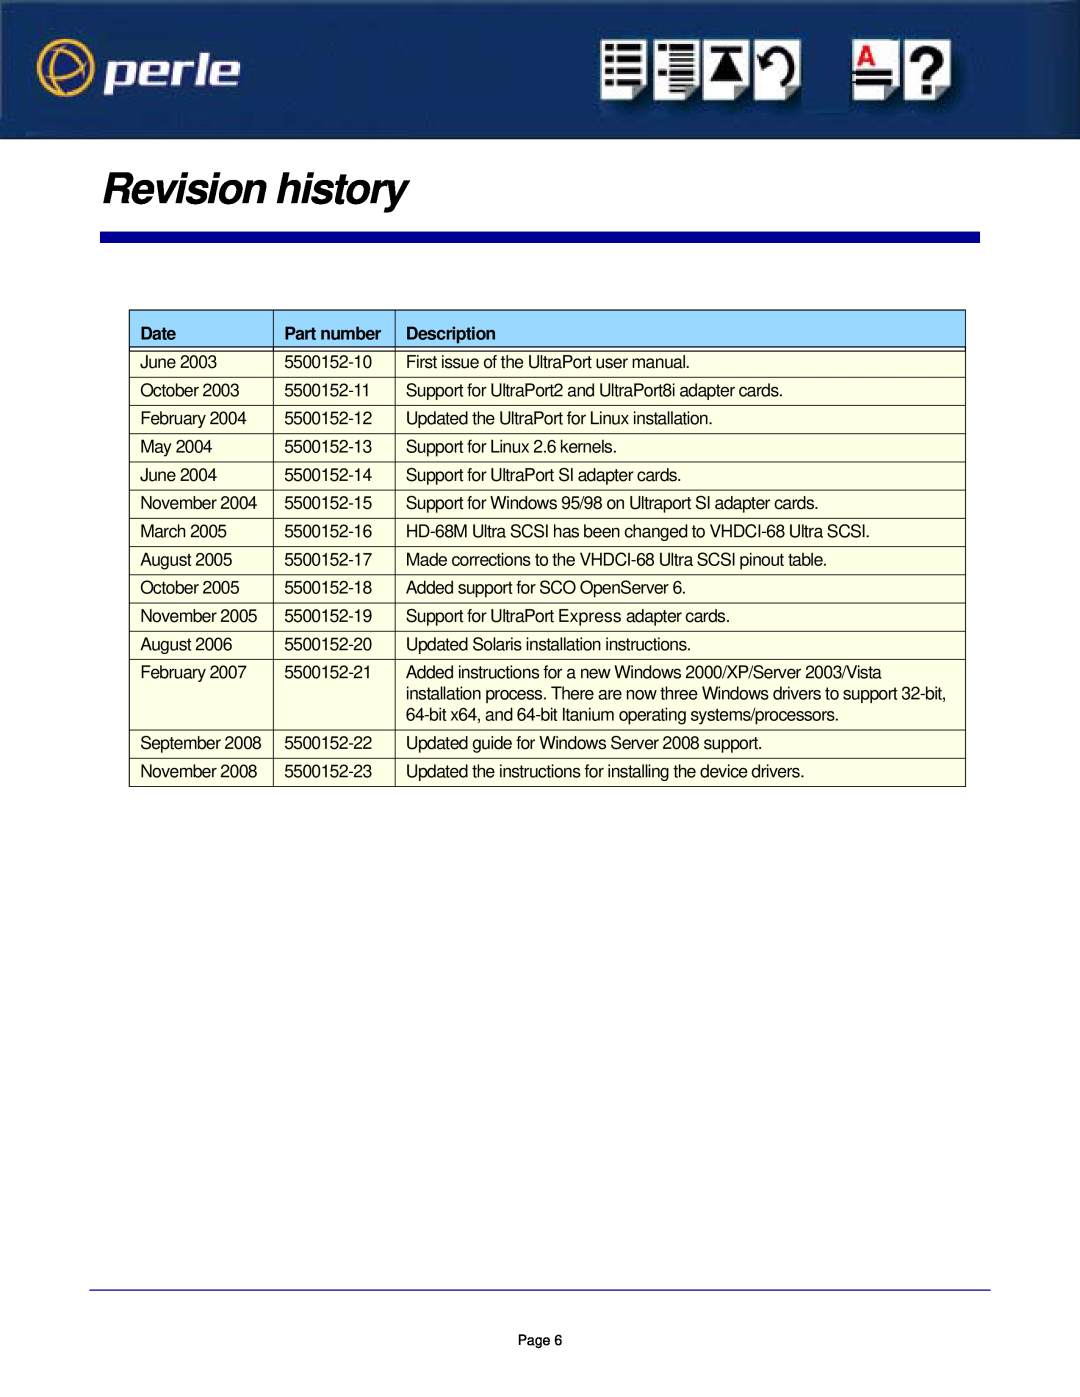 Perle Systems 5500152-23 manual Revision history, Date, Part number, Description 